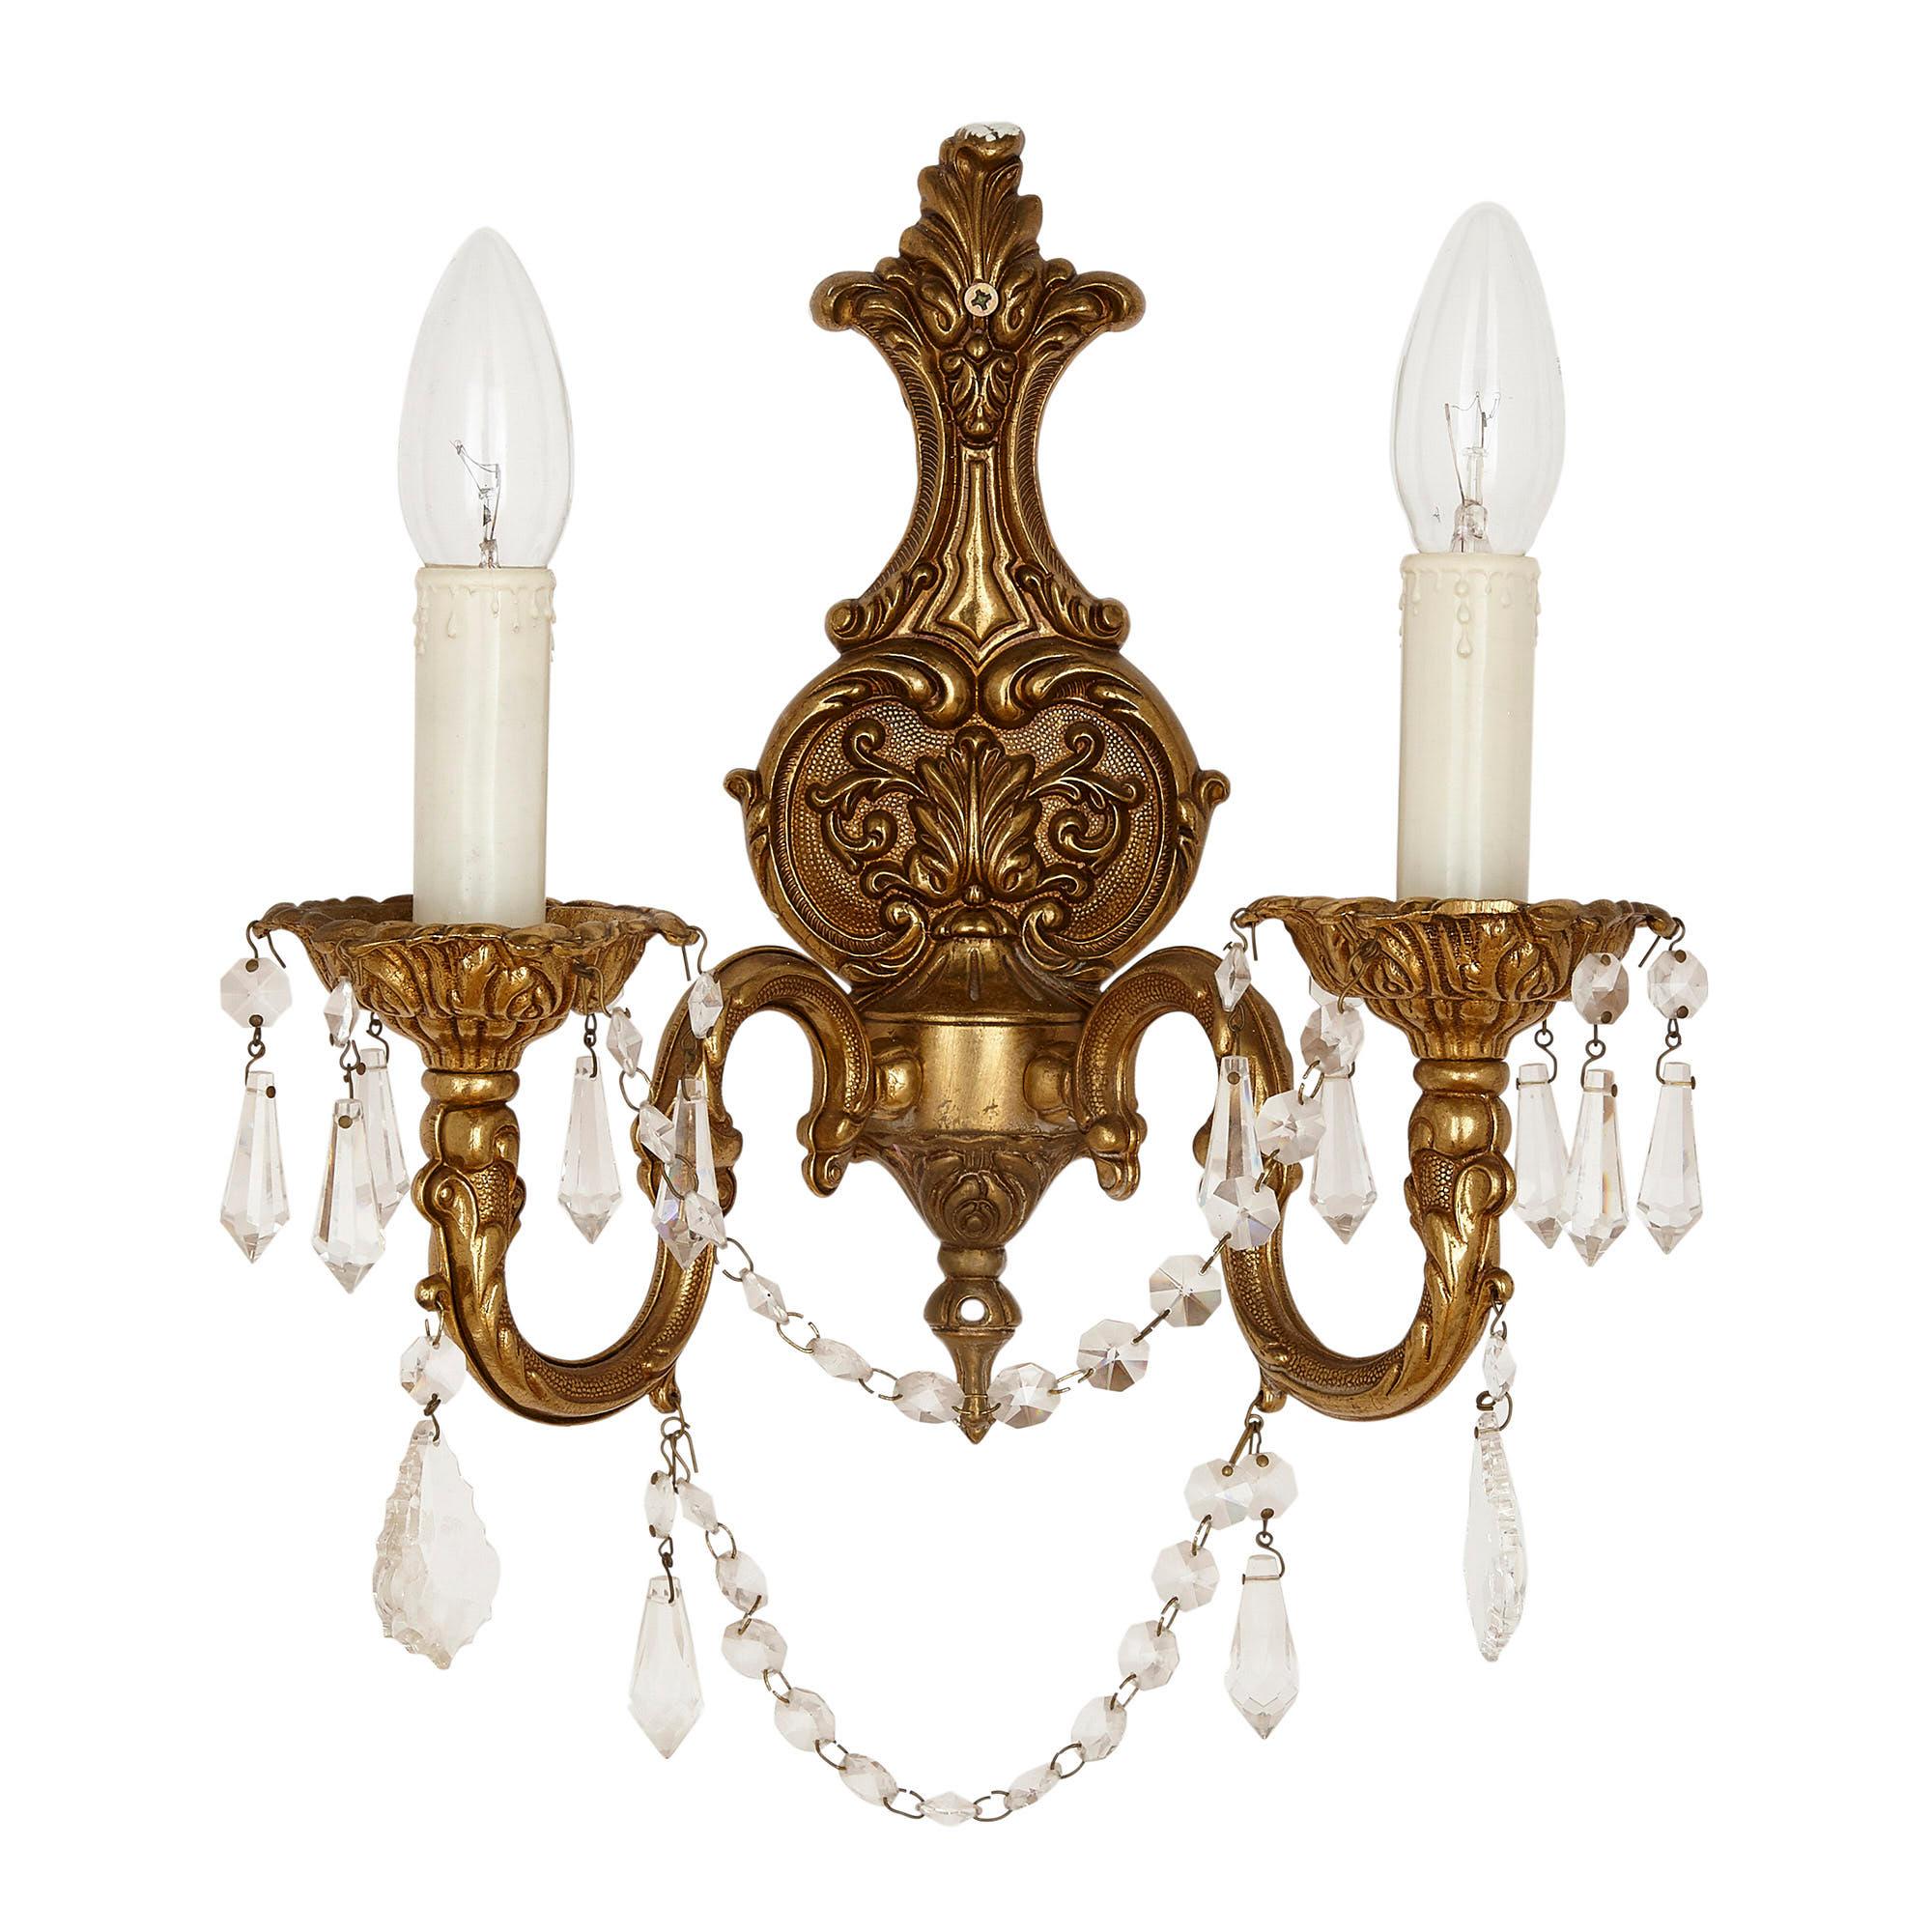 Pair of French Rococo style gilt metal sconces
French, 20th Century
Measures: Height 34cm, width 29cm, depth 15m

The sconces in this pair are crafted in the elegant Rococo style. Each sconce features a gilt metal backplate adorned with moulded